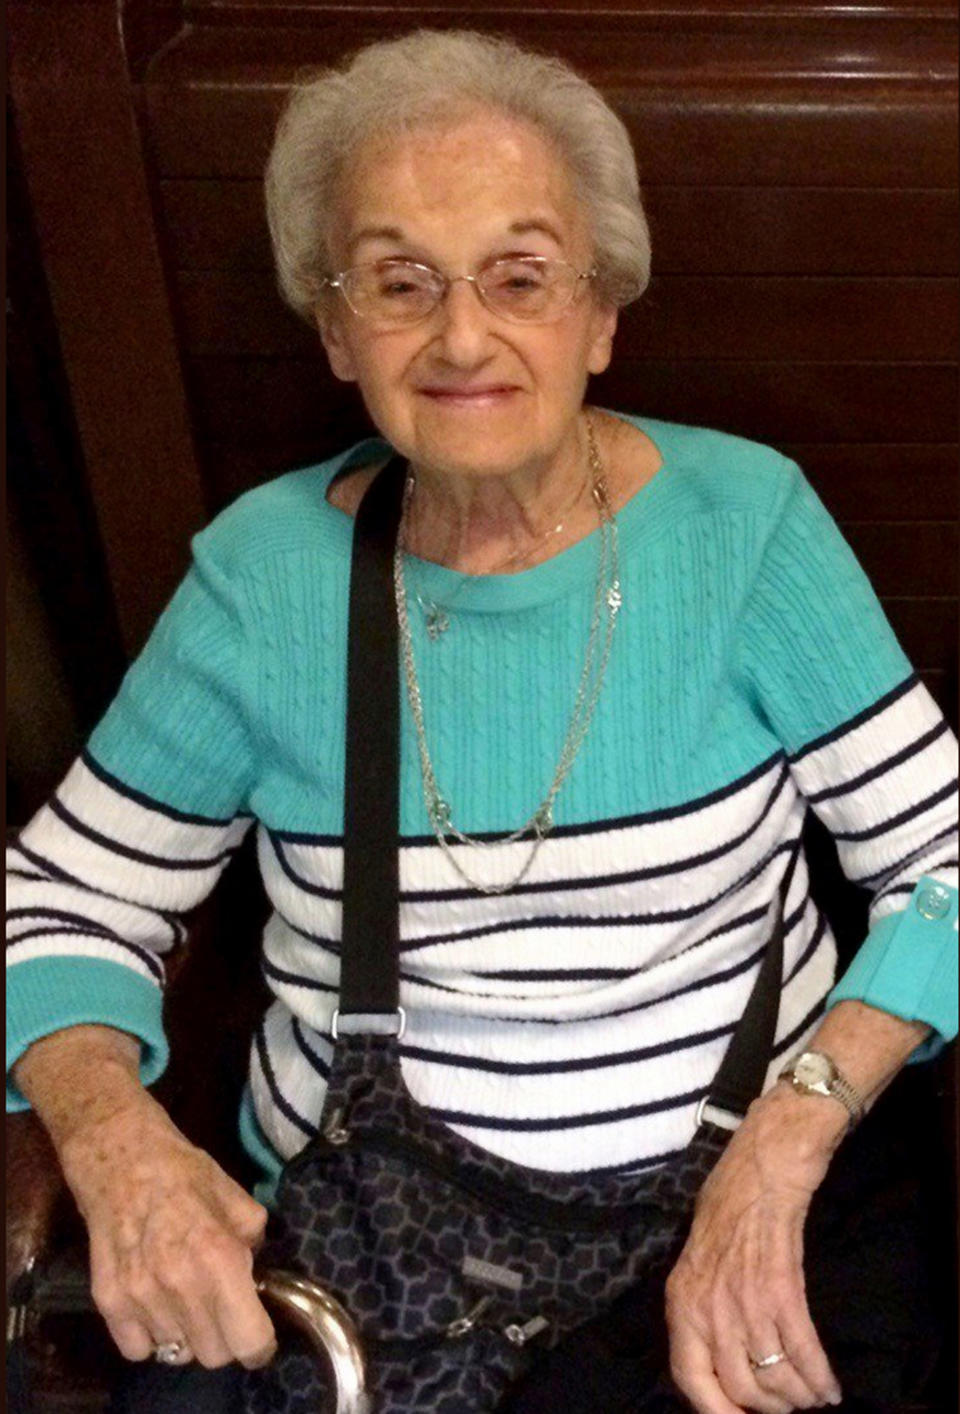 This undated family photo provided by the University of Pittsburgh Medical Center (UPMC) shows Rose Mallinger, 97, who was one of the people killed on Oct. 27, 2018, at Pittsburgh's Tree of Life synagogue. Her daughter, Andrea Wedner, was among the wounded, the family said. (Courtesy of the Mallinger family/UPMC via AP)